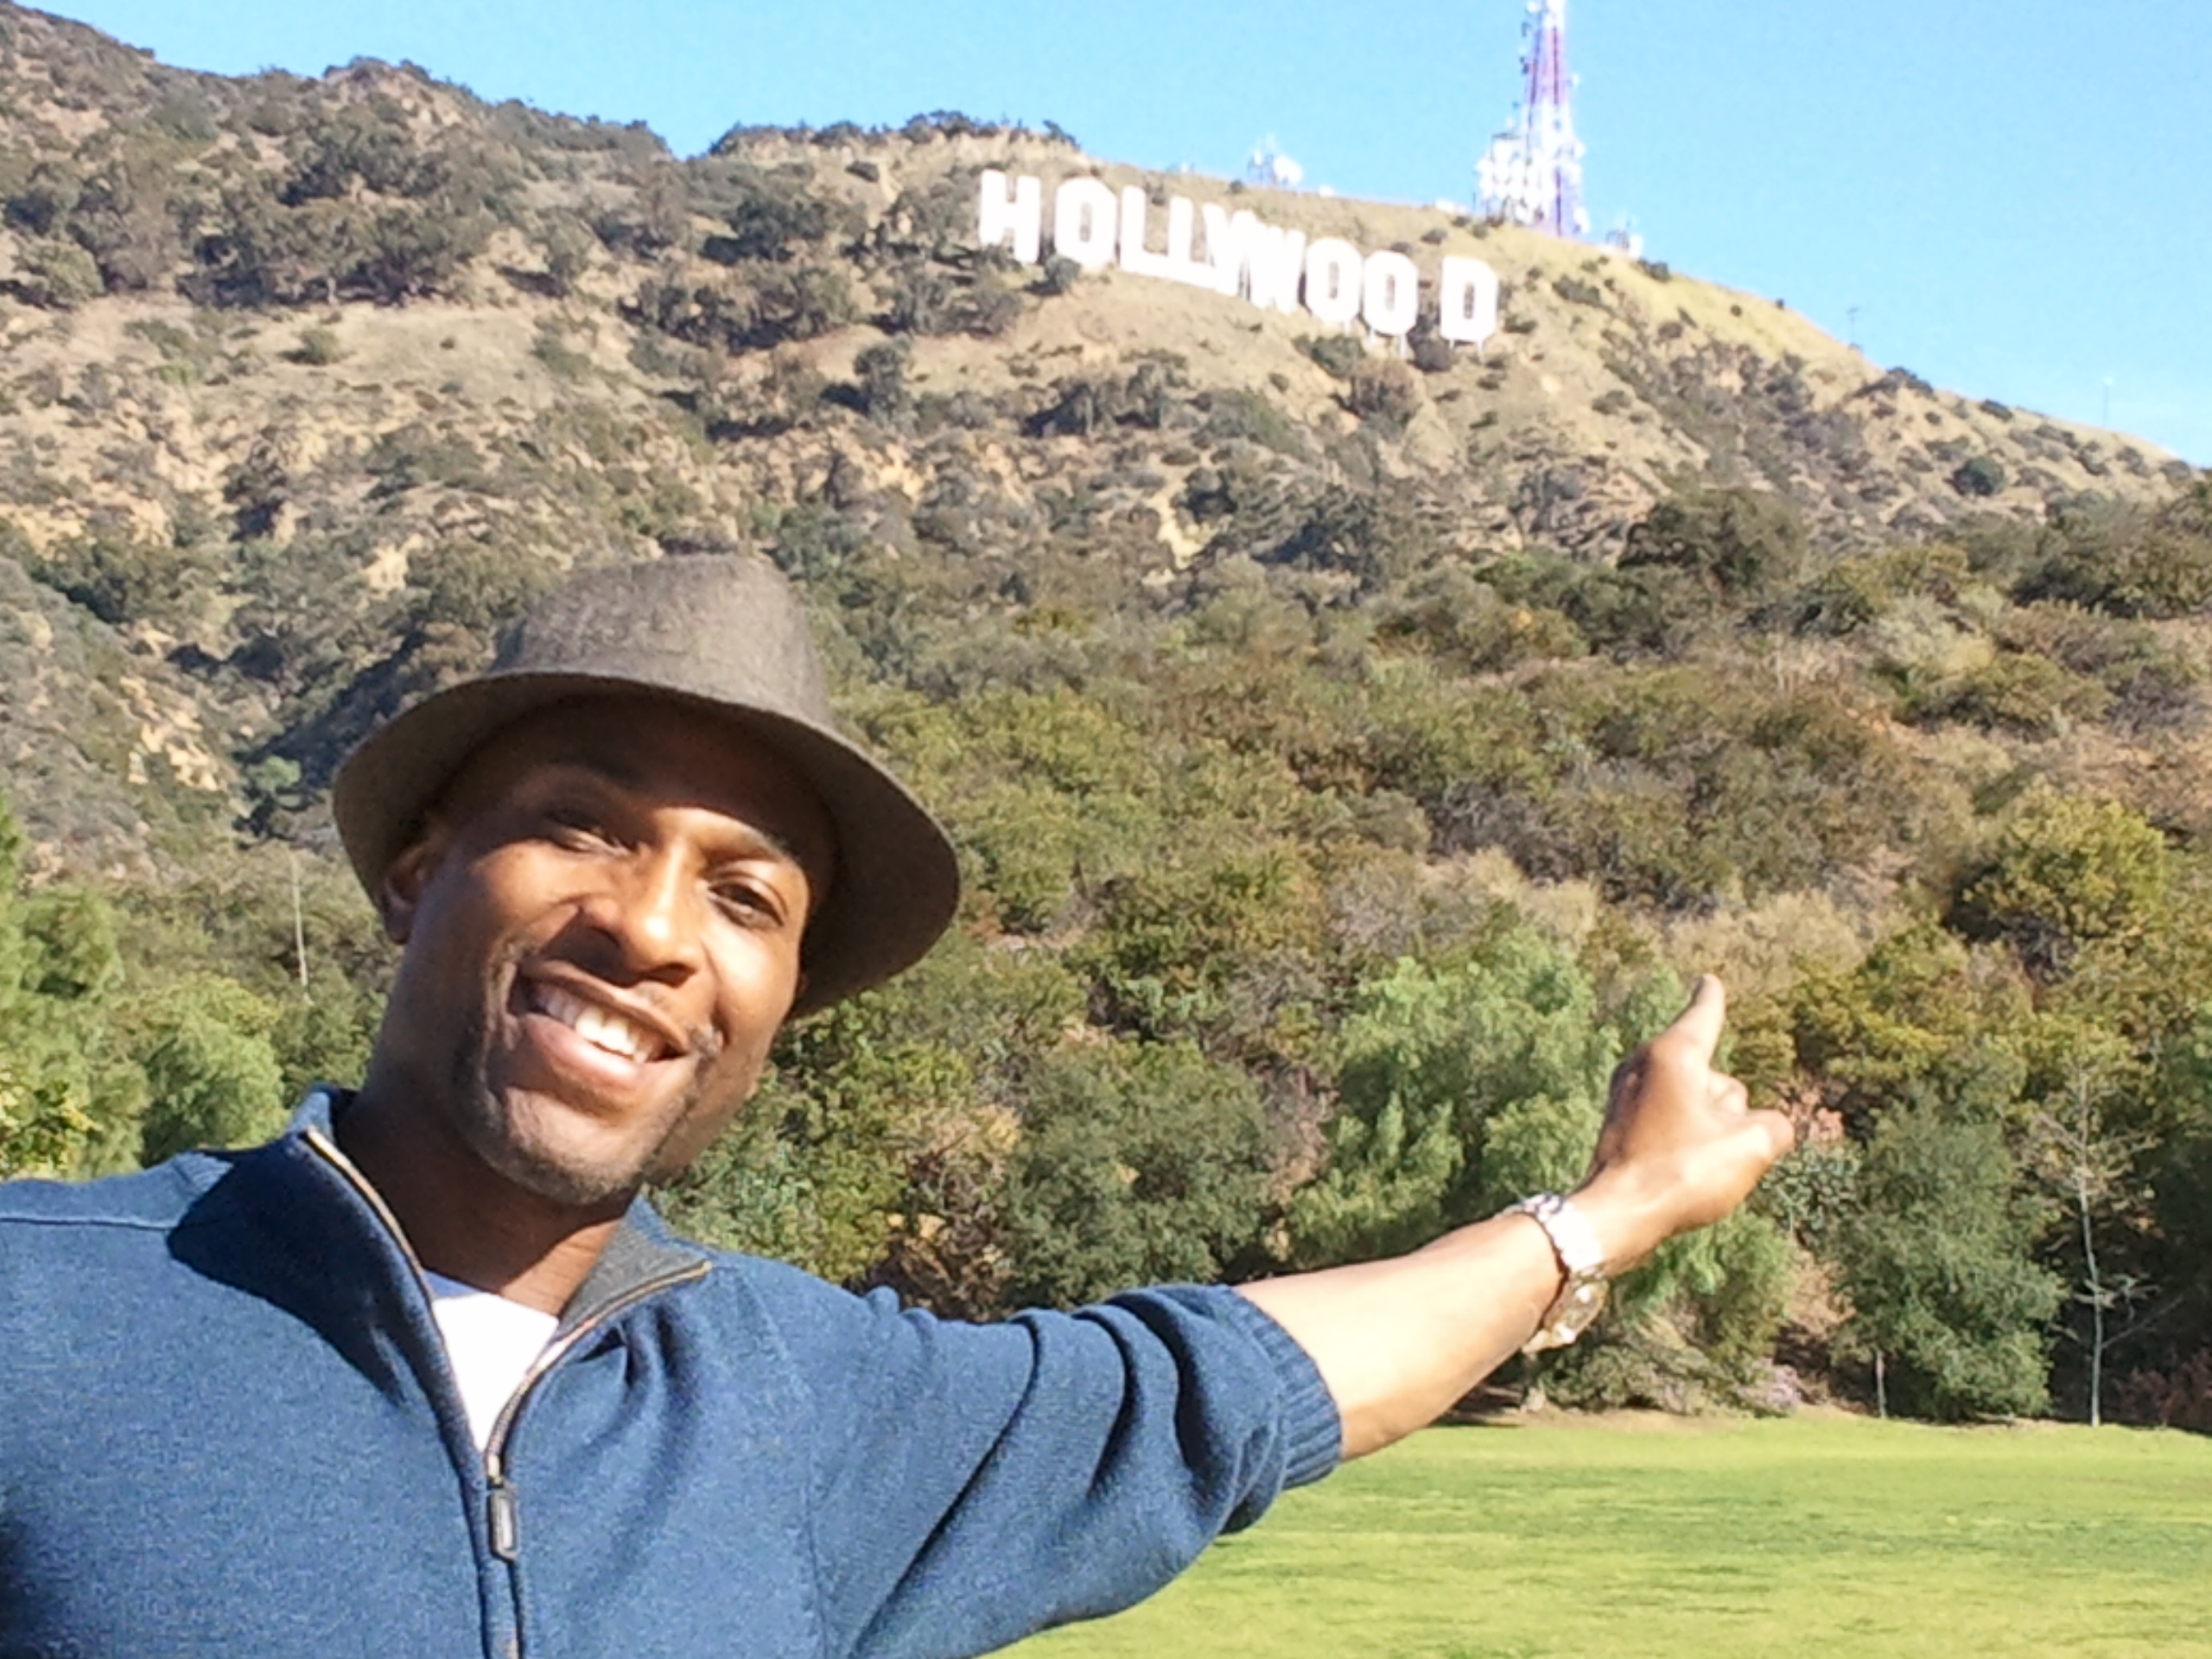 Gregory in Hollywood